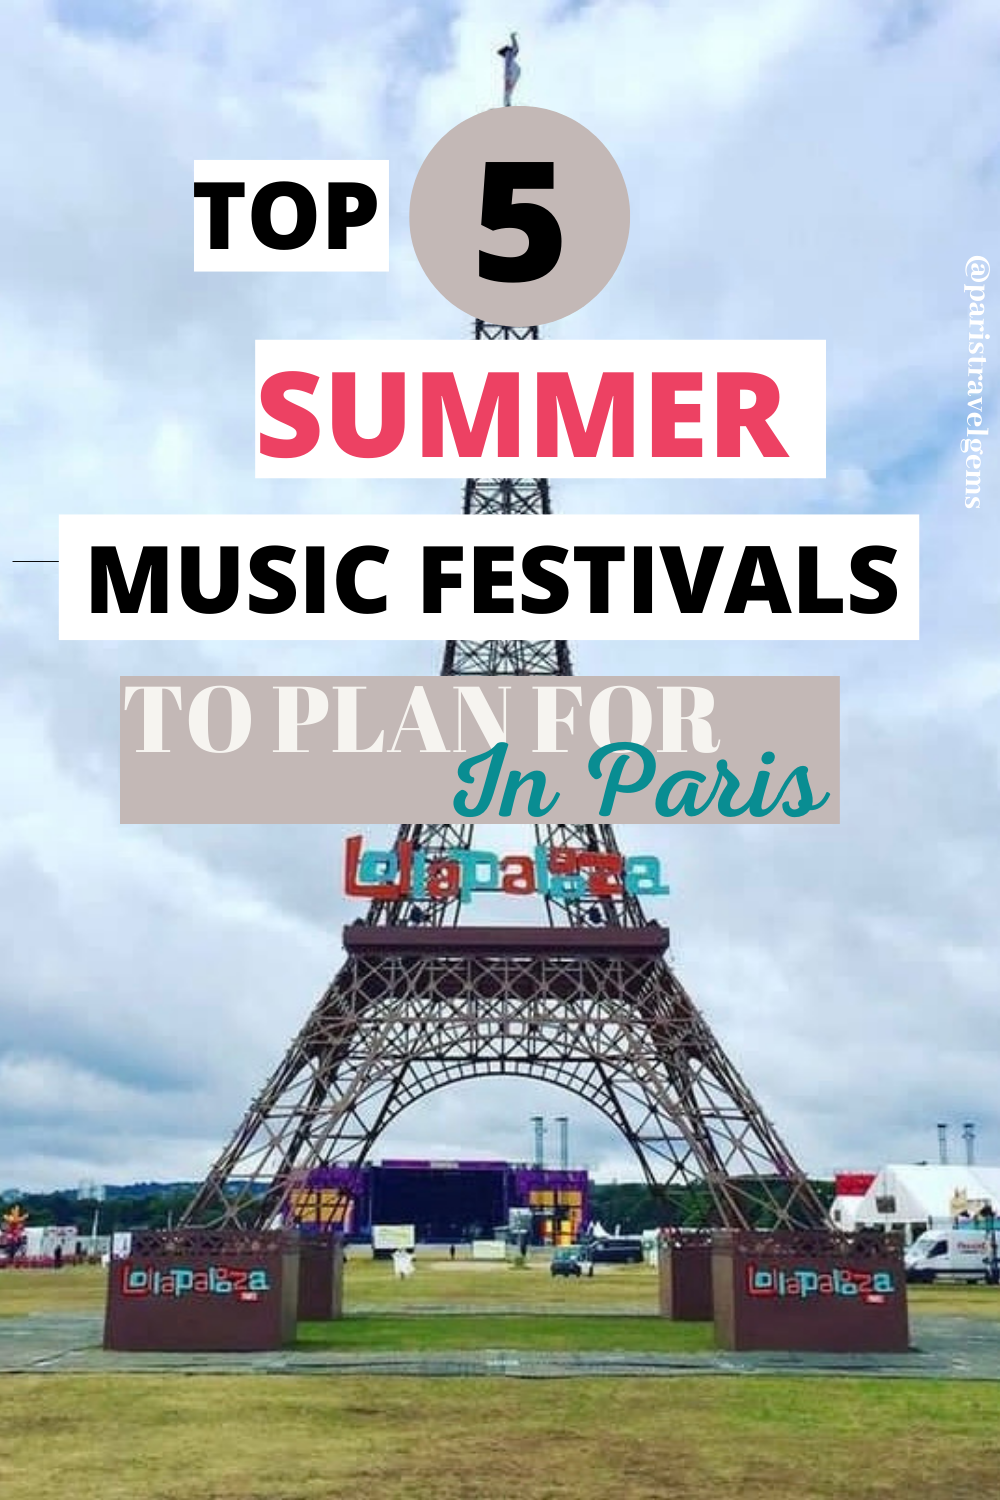 Top 5 Summer Music Festivals To Plan for In Paris.